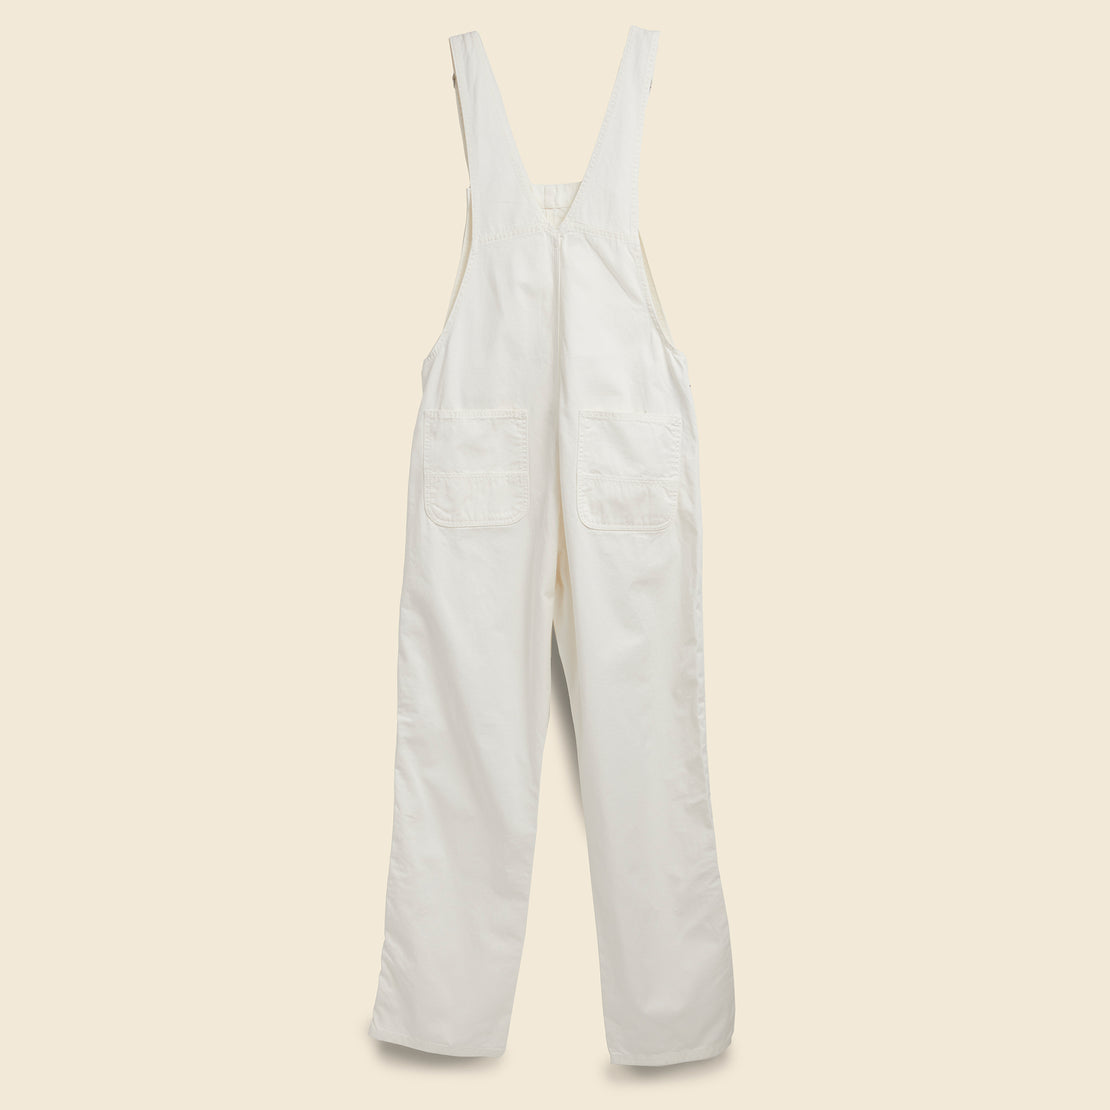 Bib Overall Straight - Off White - Carhartt WIP - STAG Provisions - W - Onepiece - Overalls